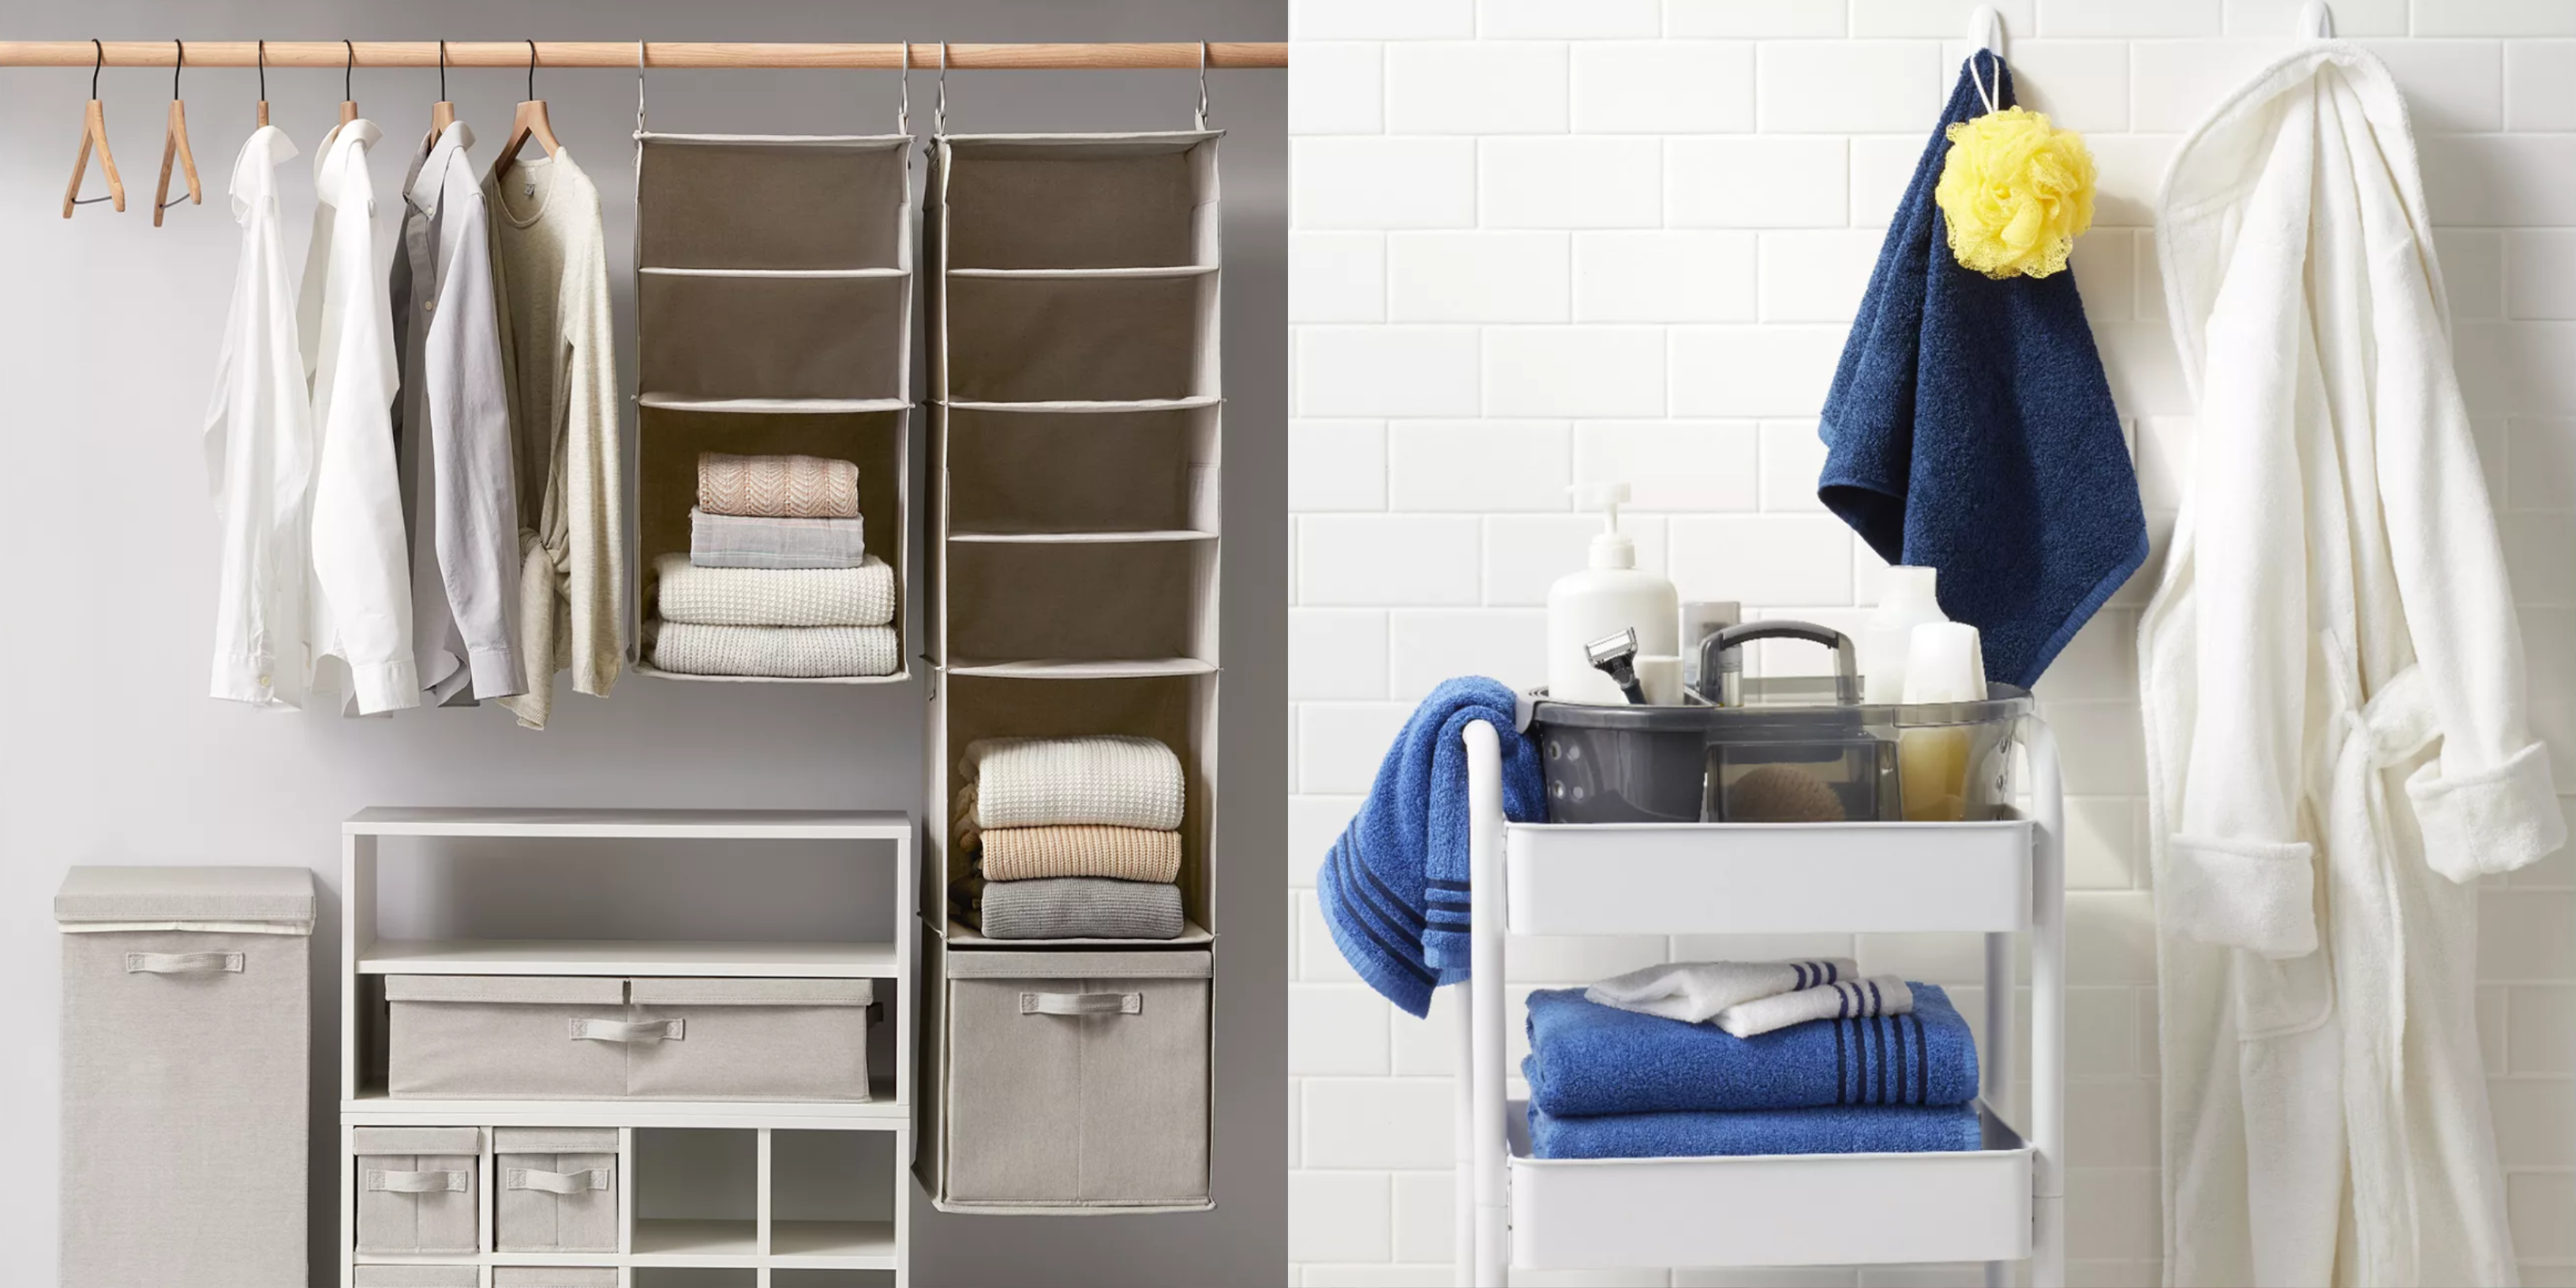 Storage Containers For Clothes : Target